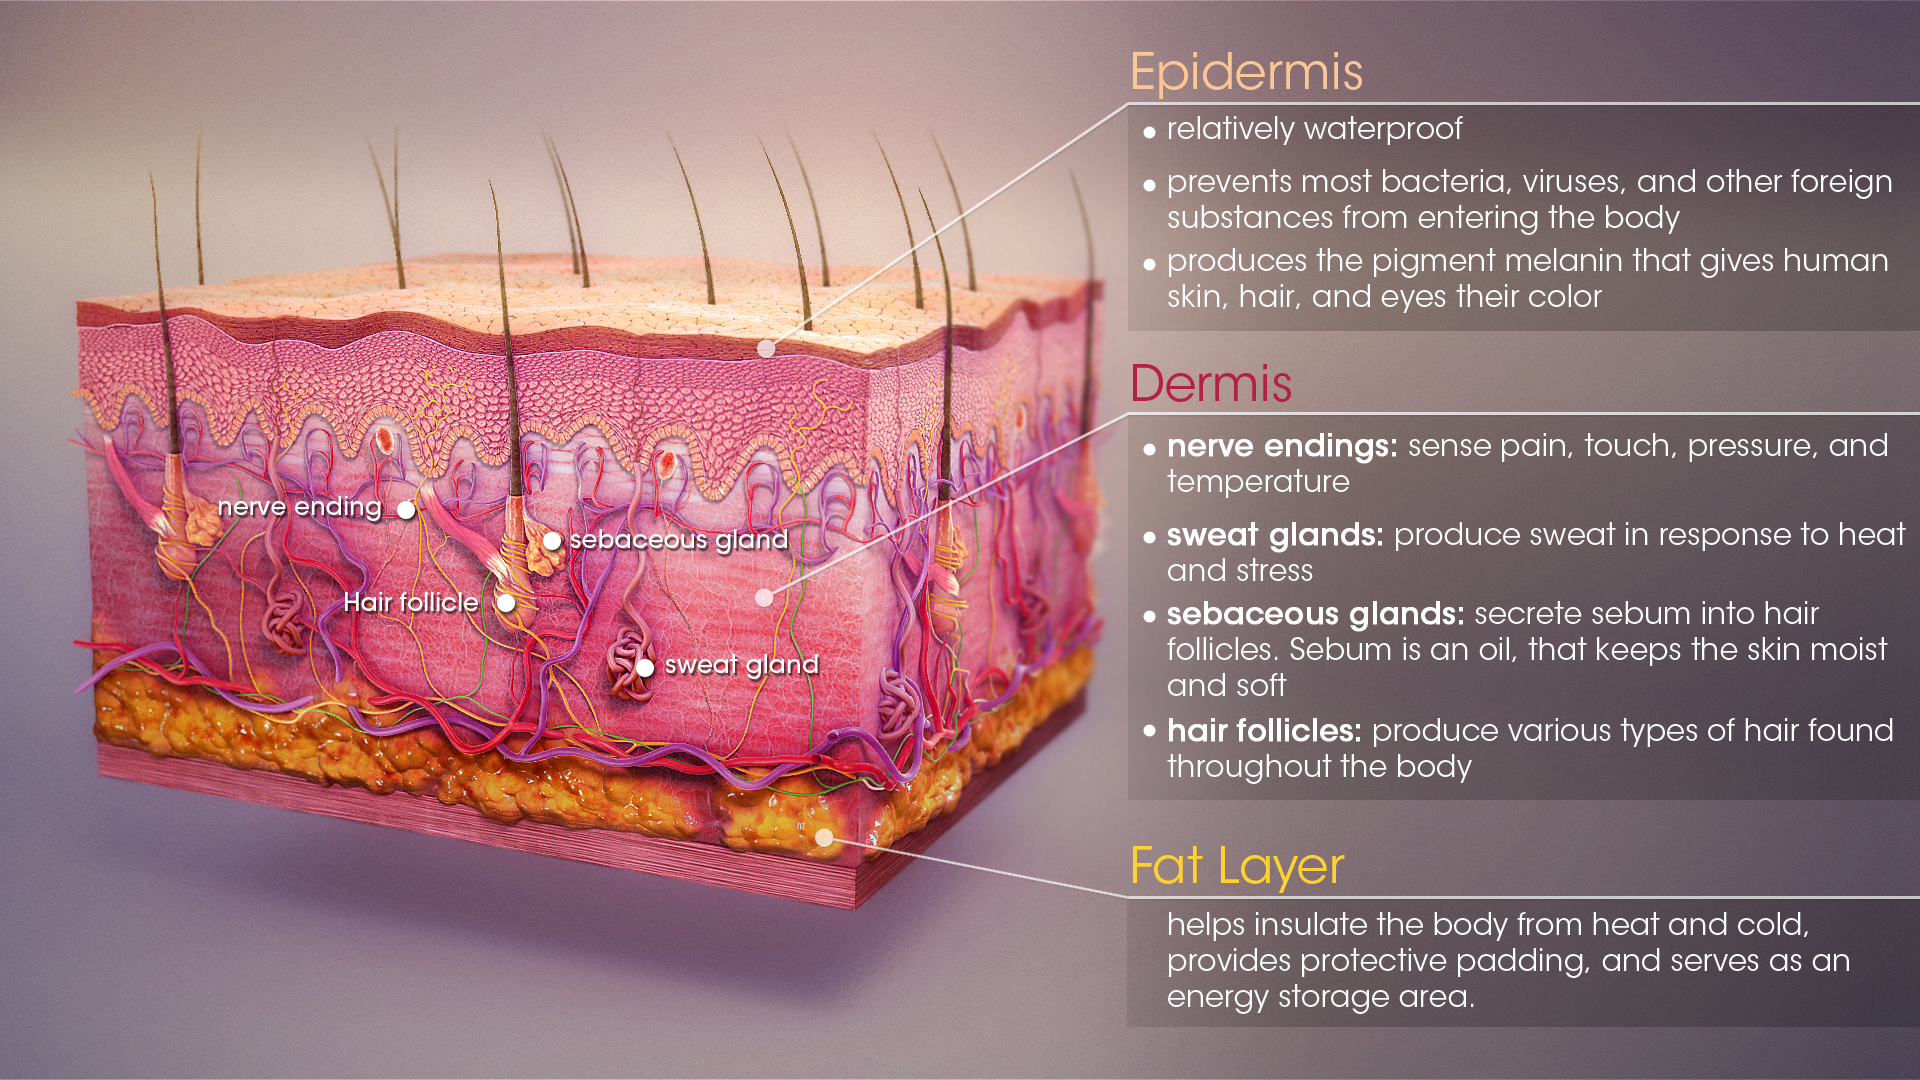 Images Of Skin Structure